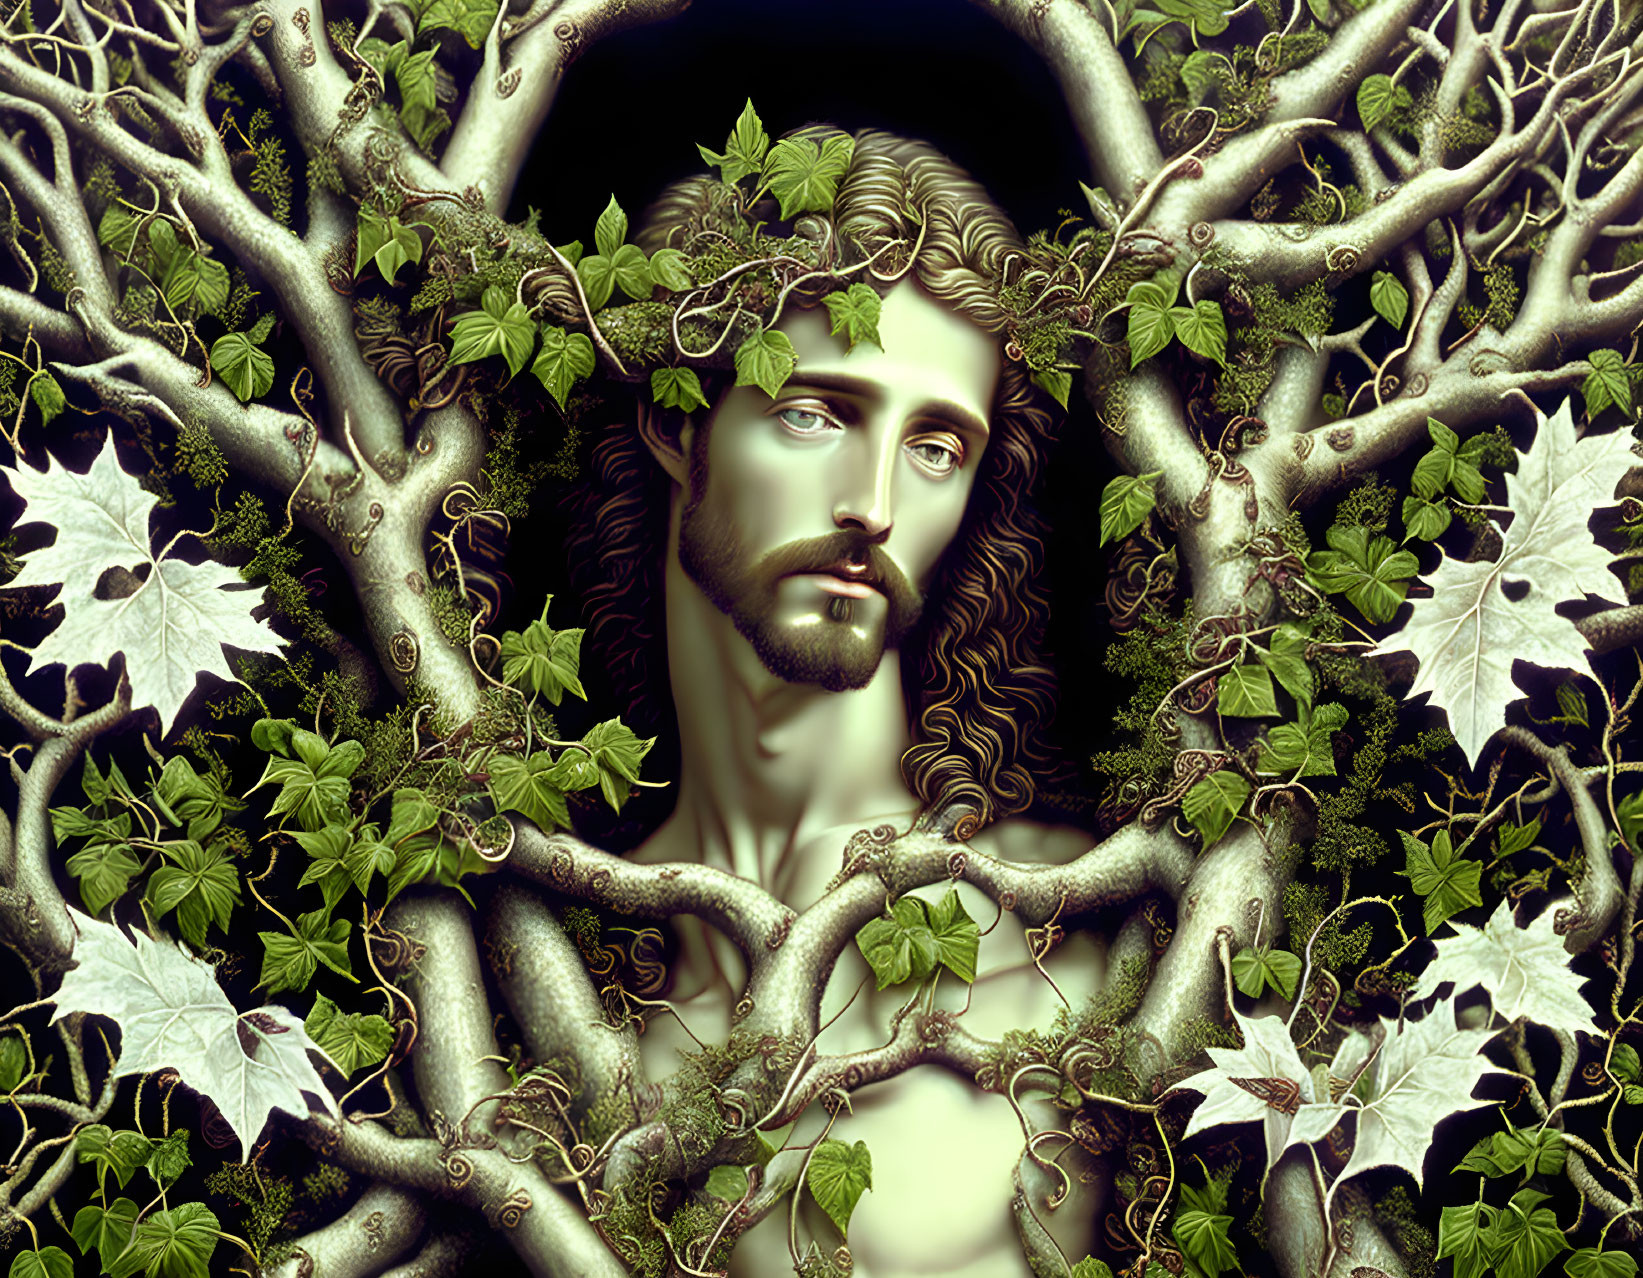 Jesus: "I am the vine and you are the branches; Wh